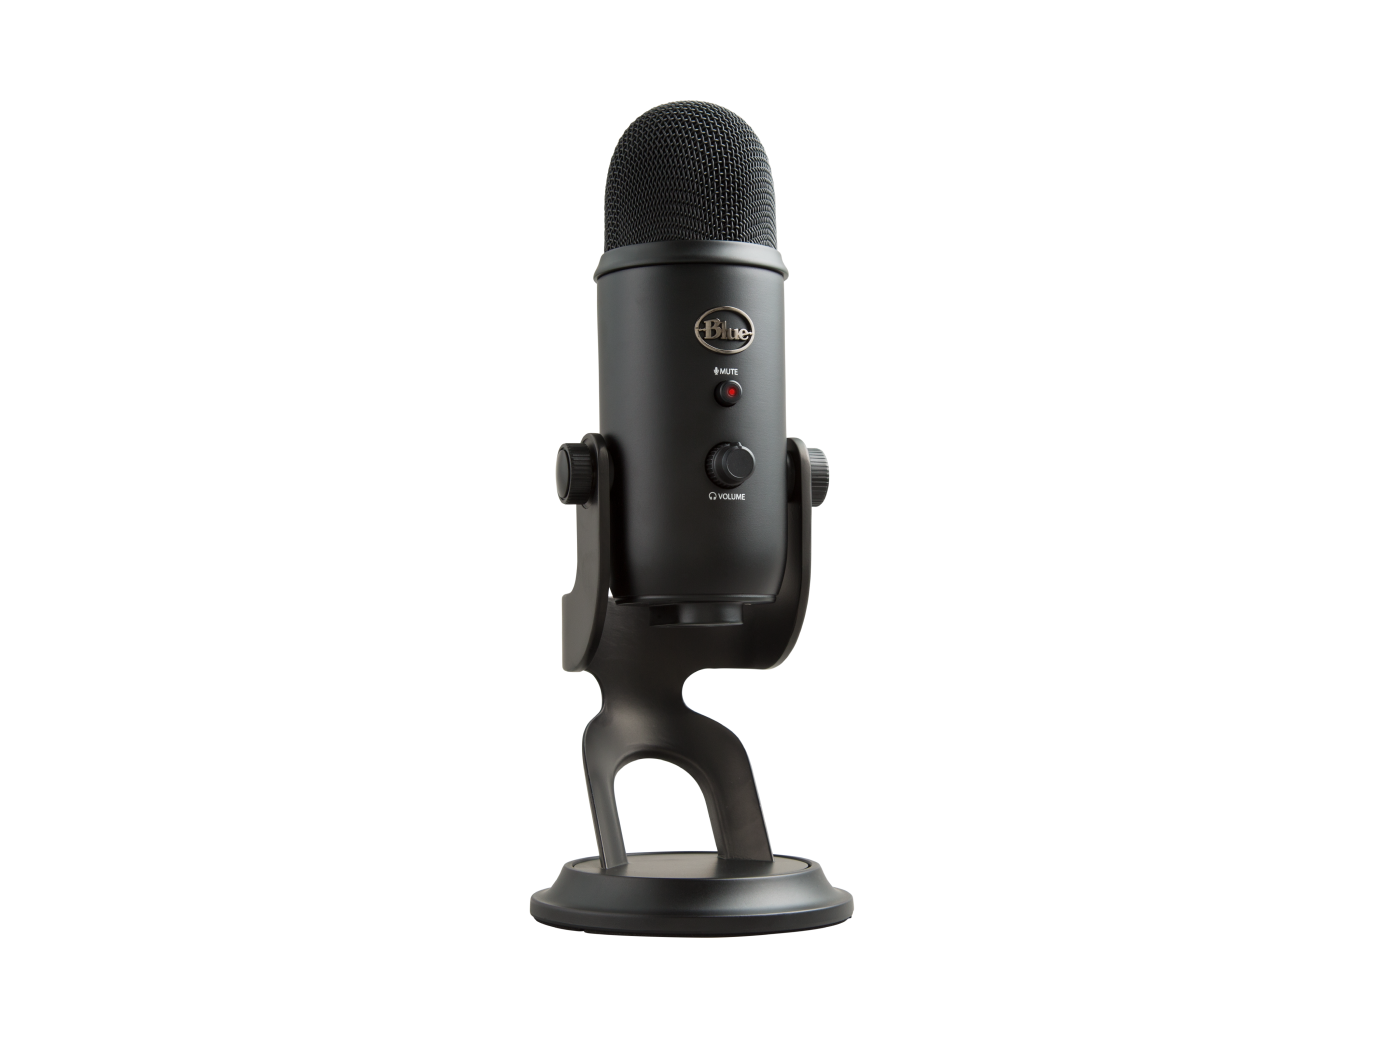 Image of Yeti Premium Multi-Pattern USB Microphone with Blue VO!CEout